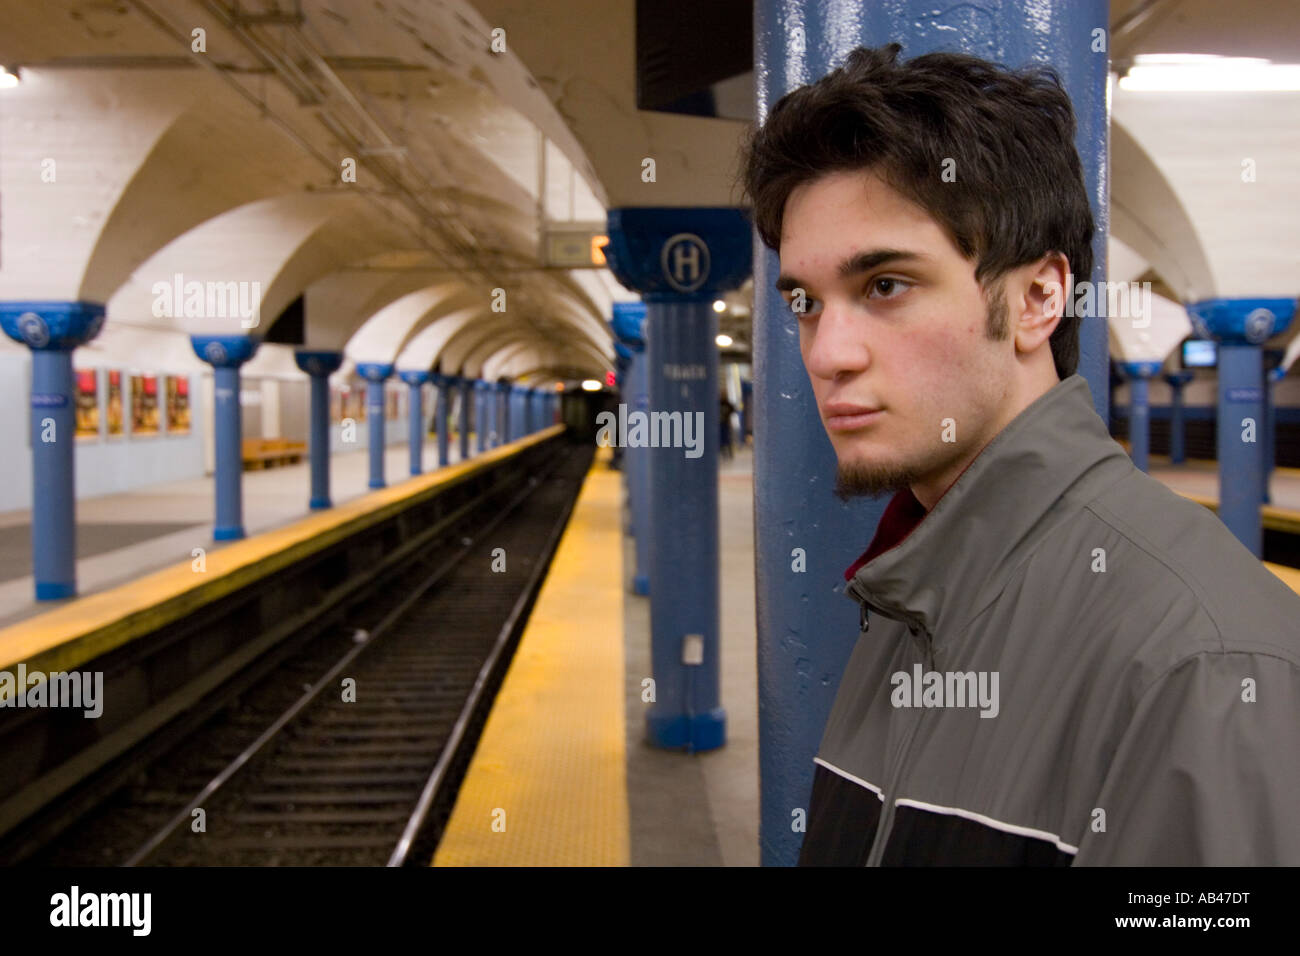 A young man waiting for a subway in a subway station. Stock Photo